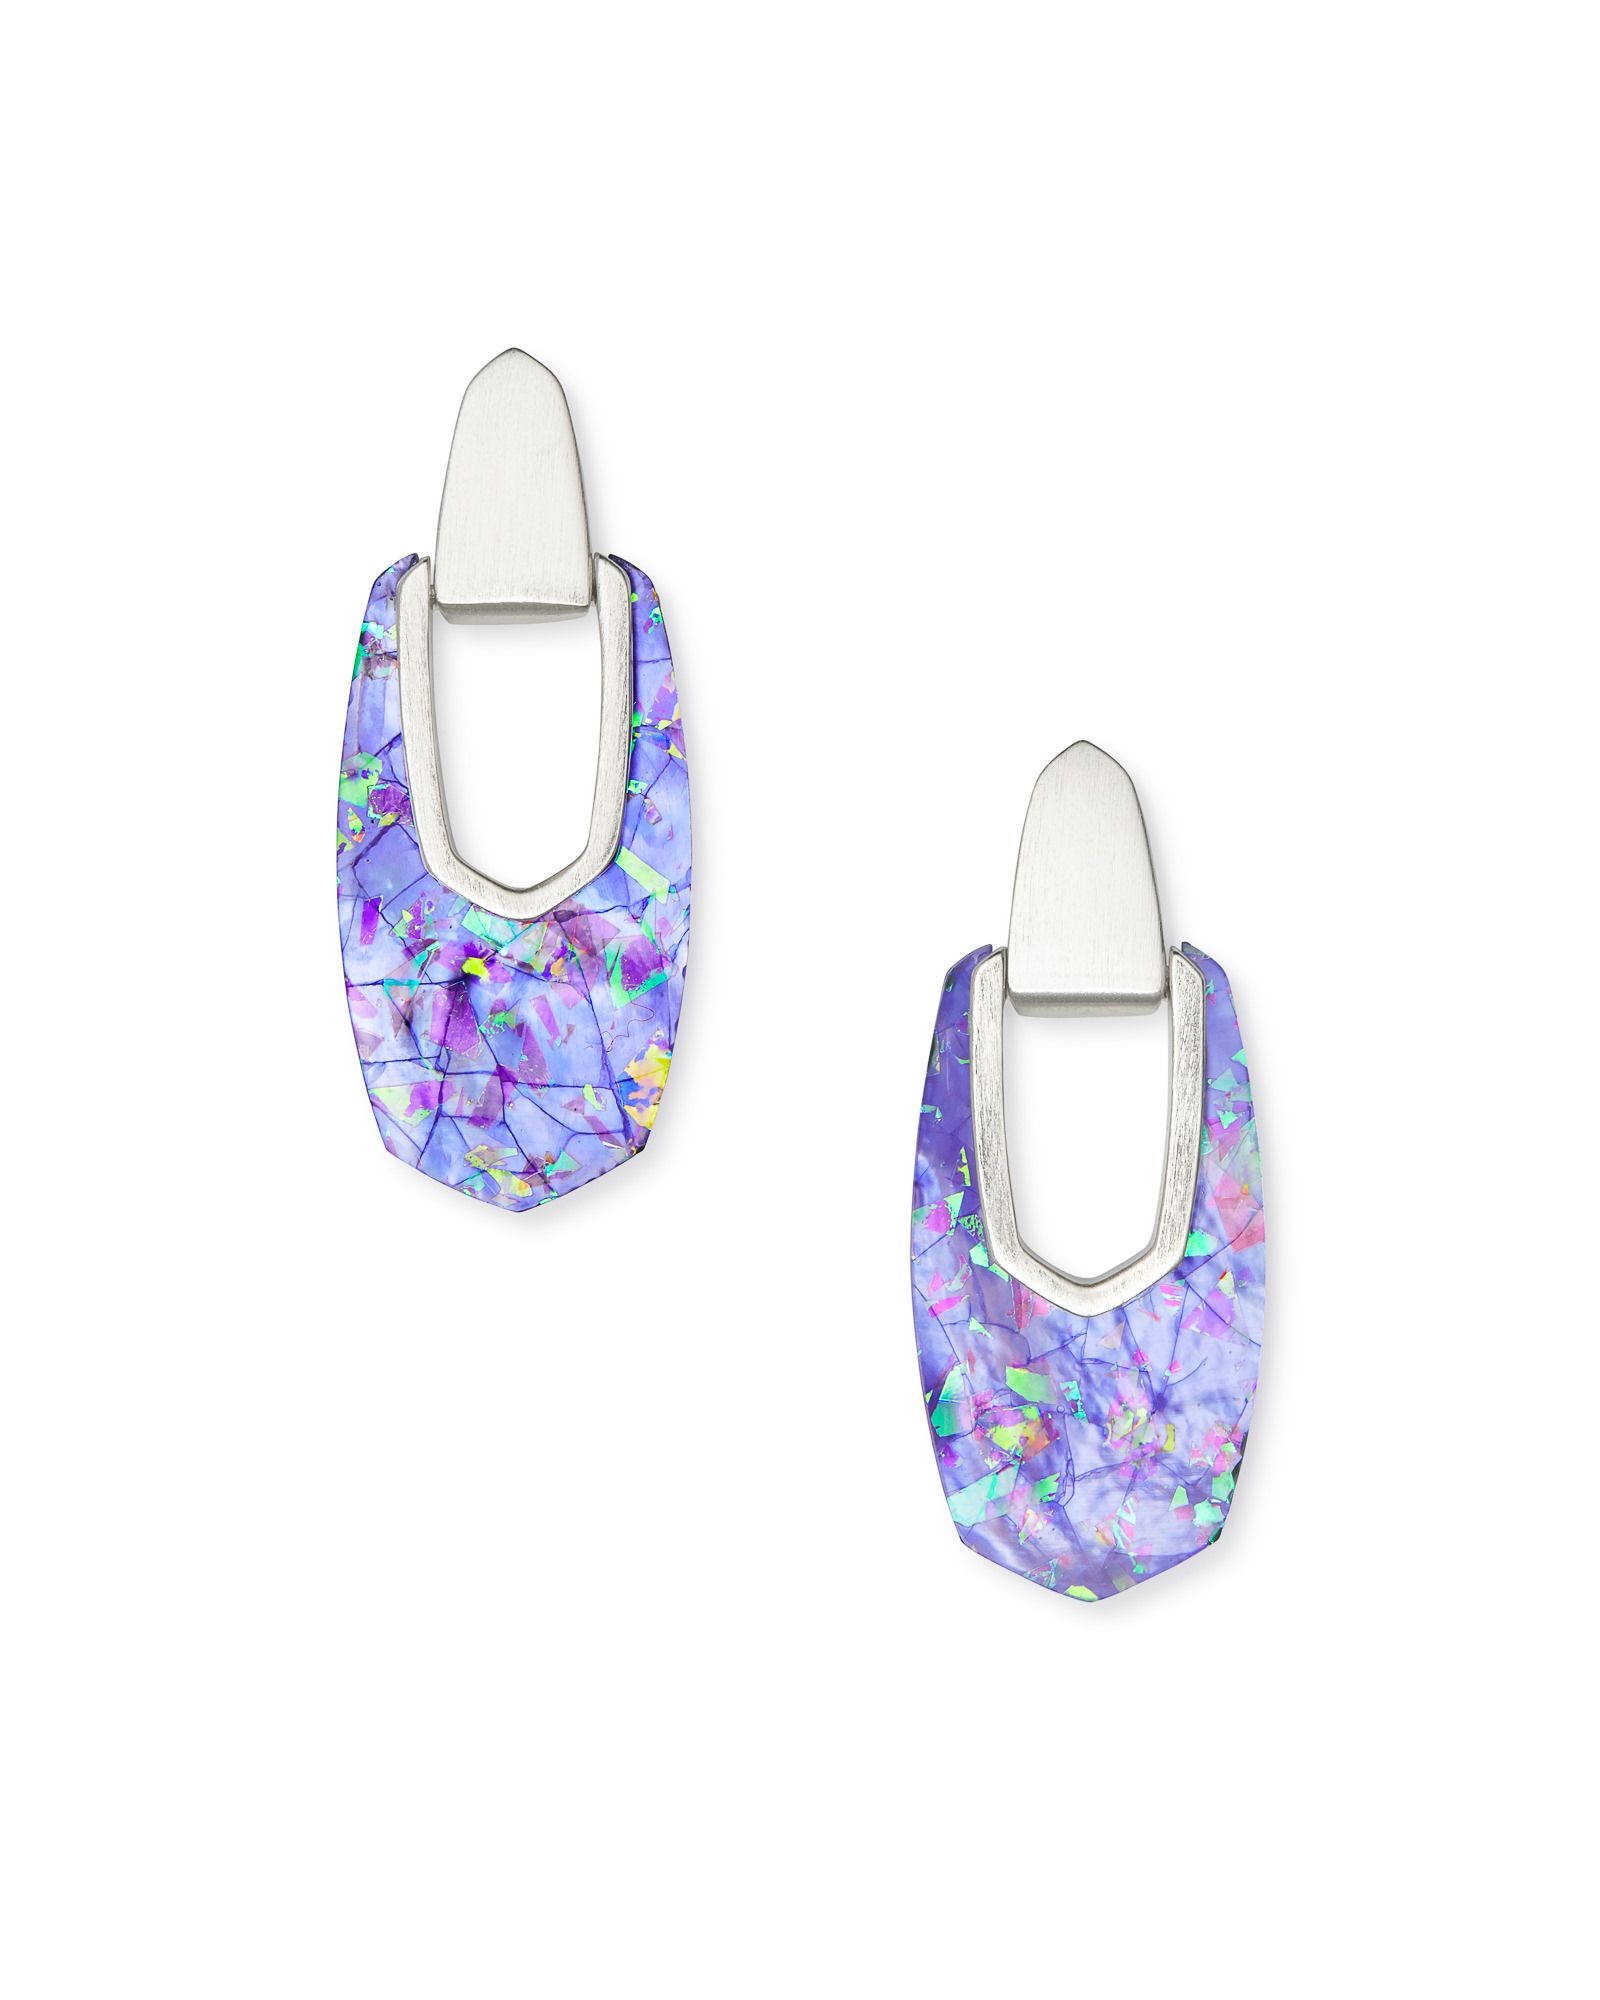 Kailyn Silver Drop Earrings in Iridescent Lilac Illusion | Kendra Scott